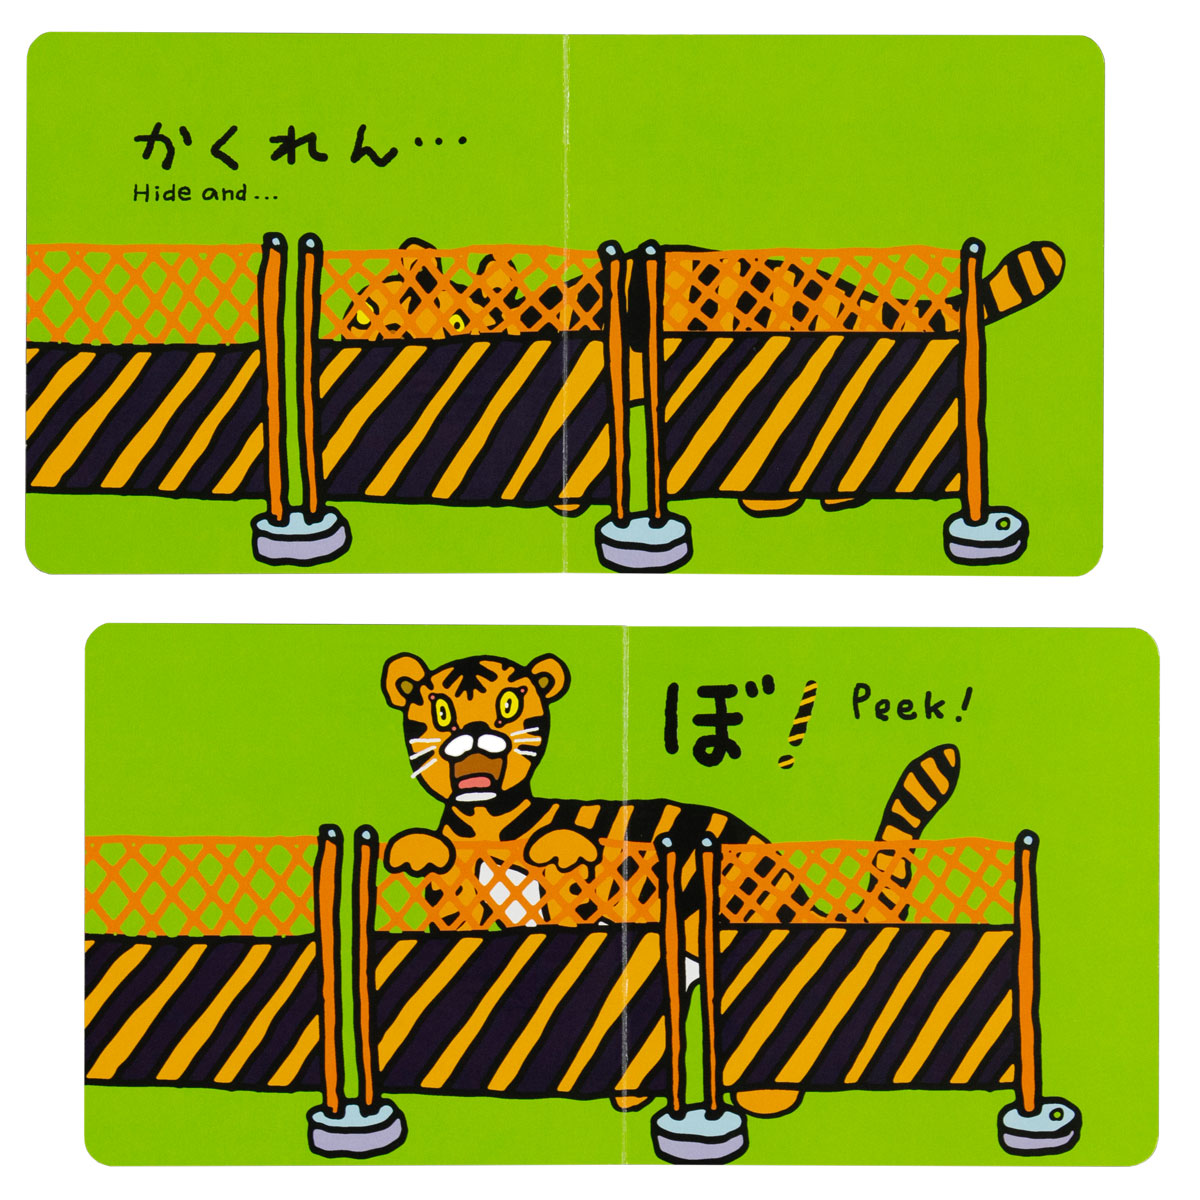 The picture book is developed in simple Japanese and English.